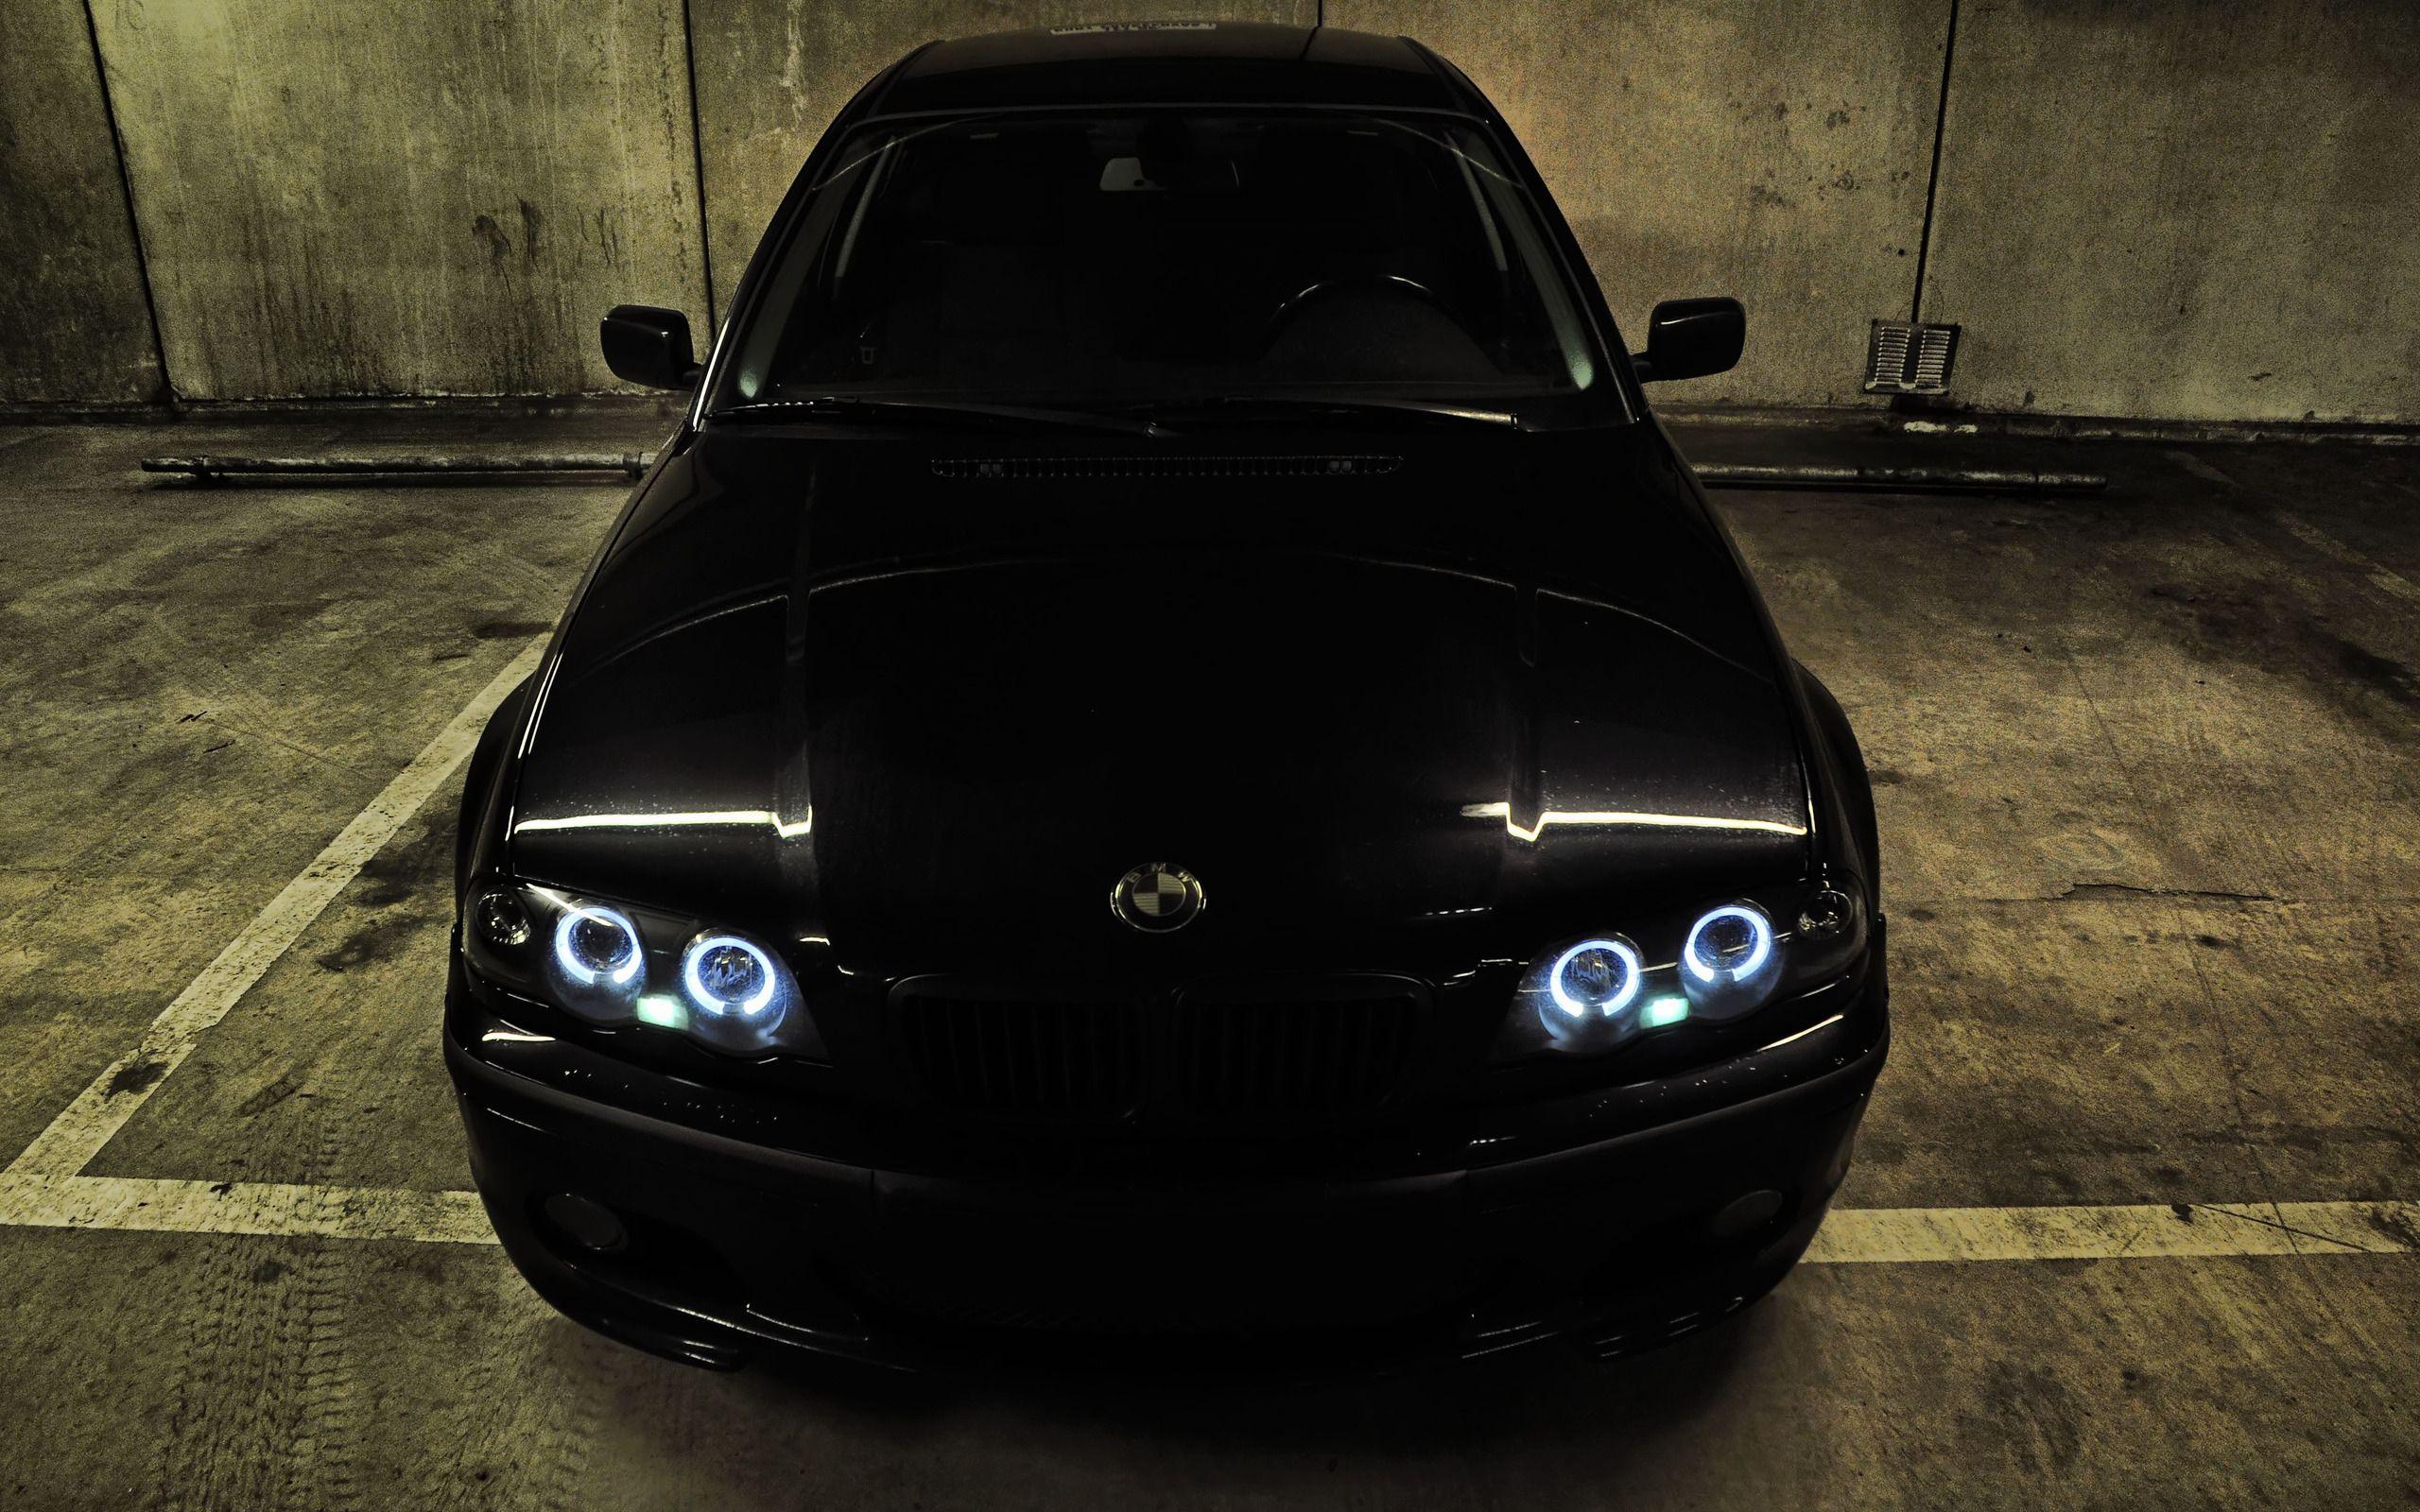 Black BMW wallpaper and image, picture, photo